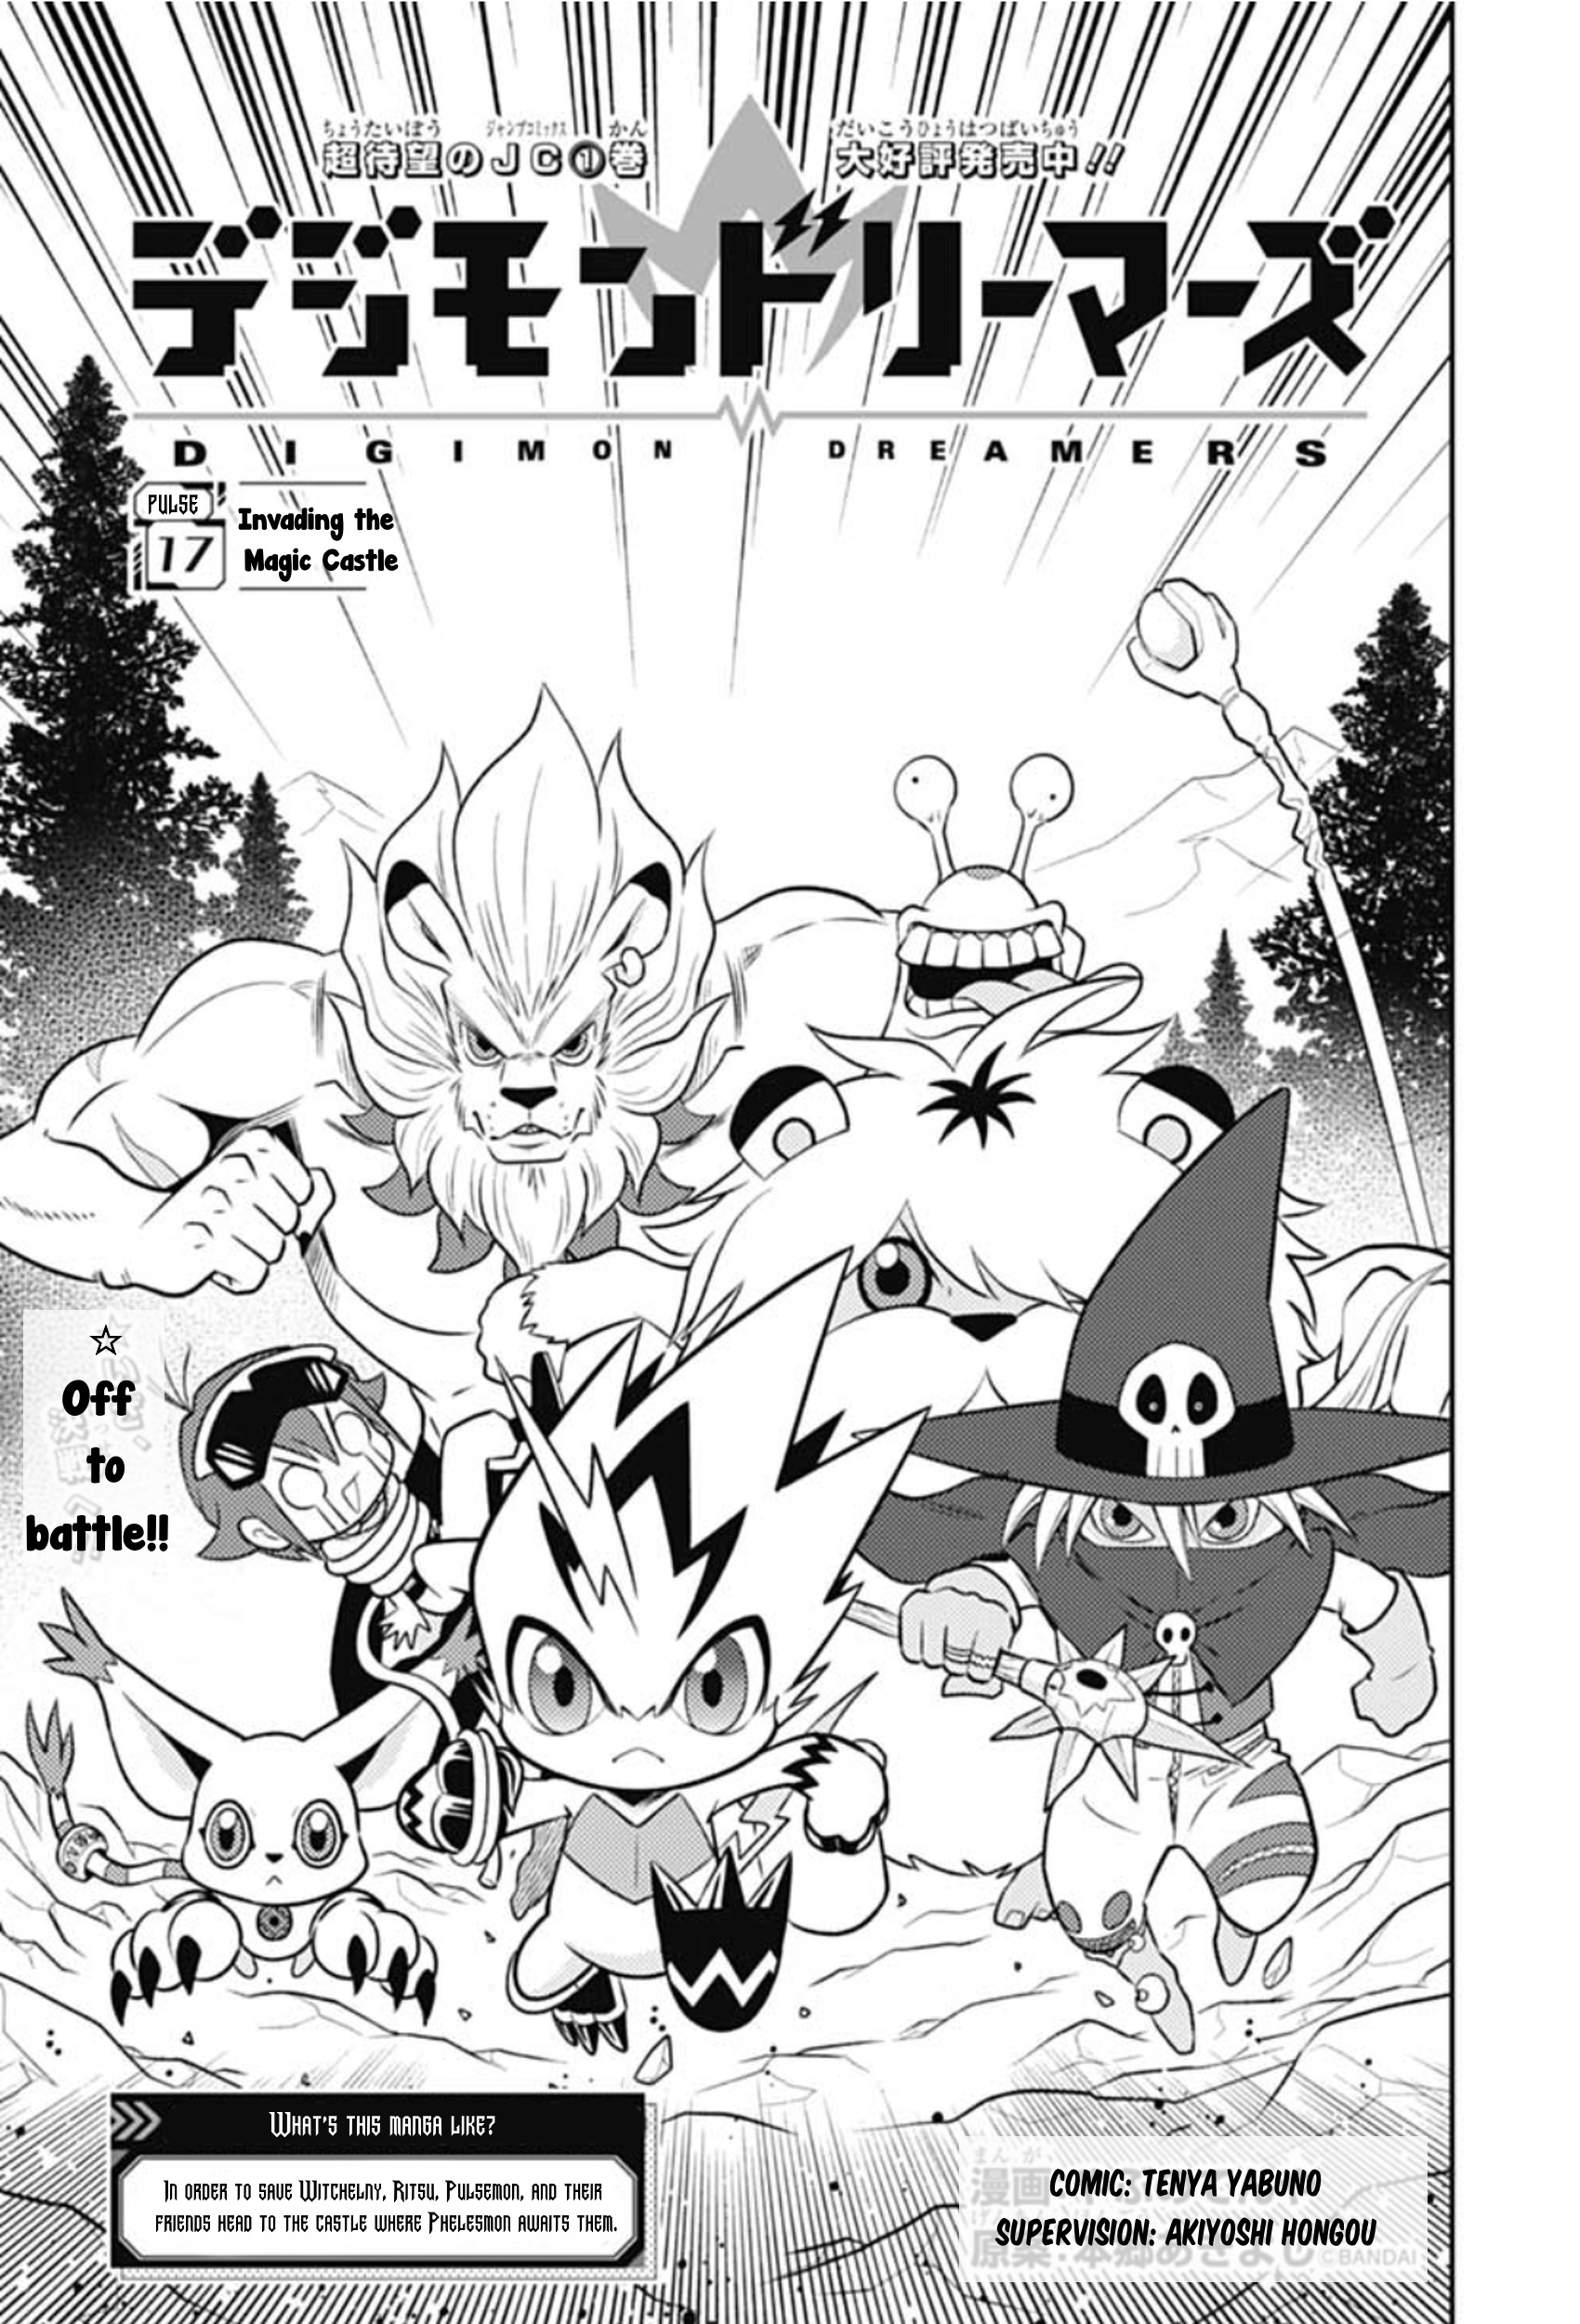 Digimon Dreamers Vol.2 Chapter 17: Invading The Magic Castle - Picture 3